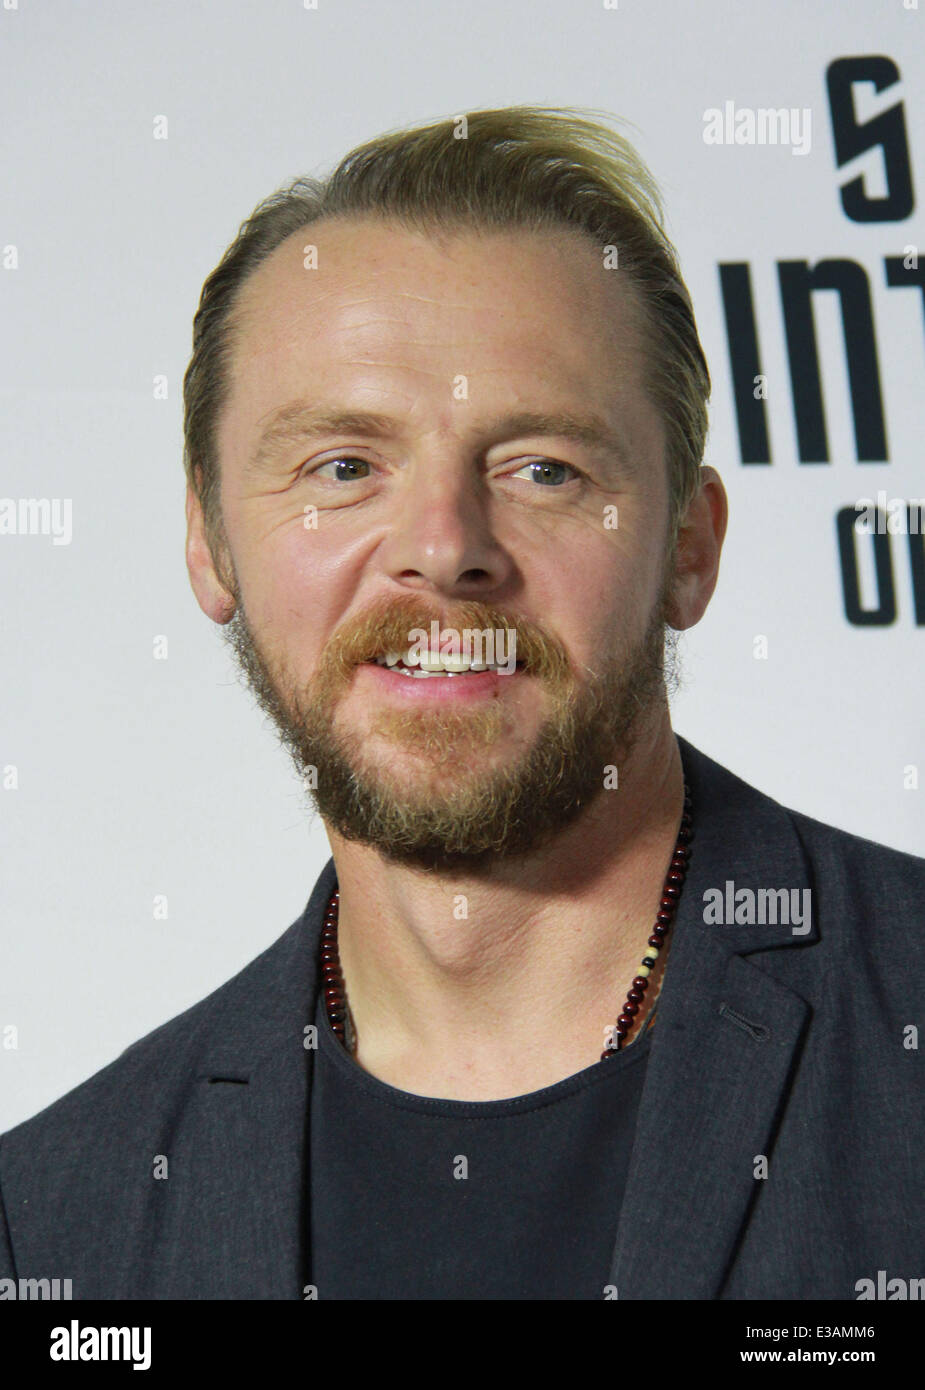 Paramount Pictures Celebrates The Blu-ray And DVD Debut Of 'Star Trek: Into Darkness' Held at California Science Center  Featuring: Simon Pegg Where: Los Angeles, California, United States When: 11 Sep 2013 Stock Photo